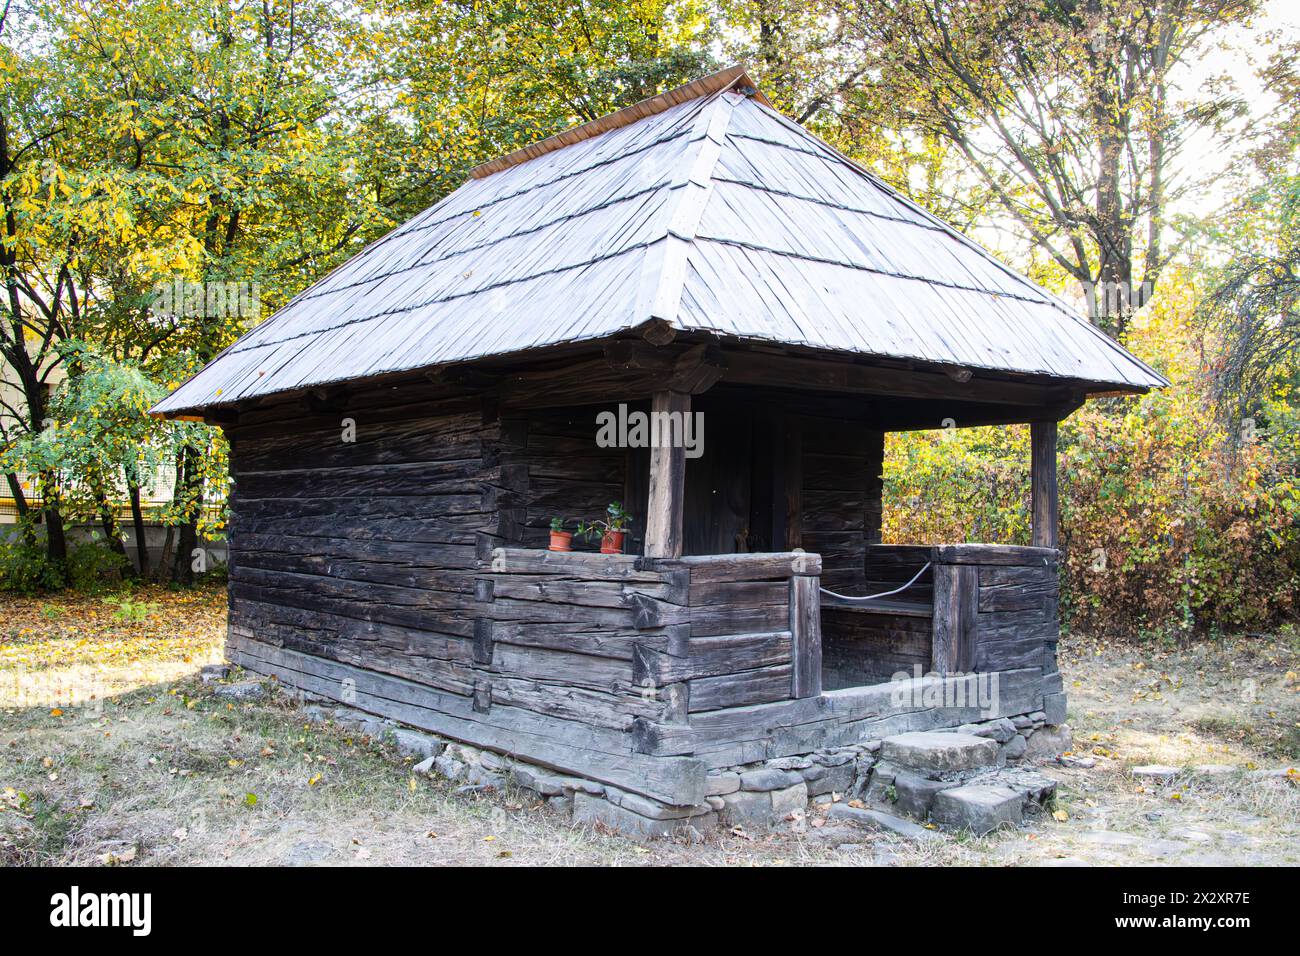 Old traditional house at the Dimitrie Gusti Village Museum, an open air museum in Bucharest, Romania Stock Photo